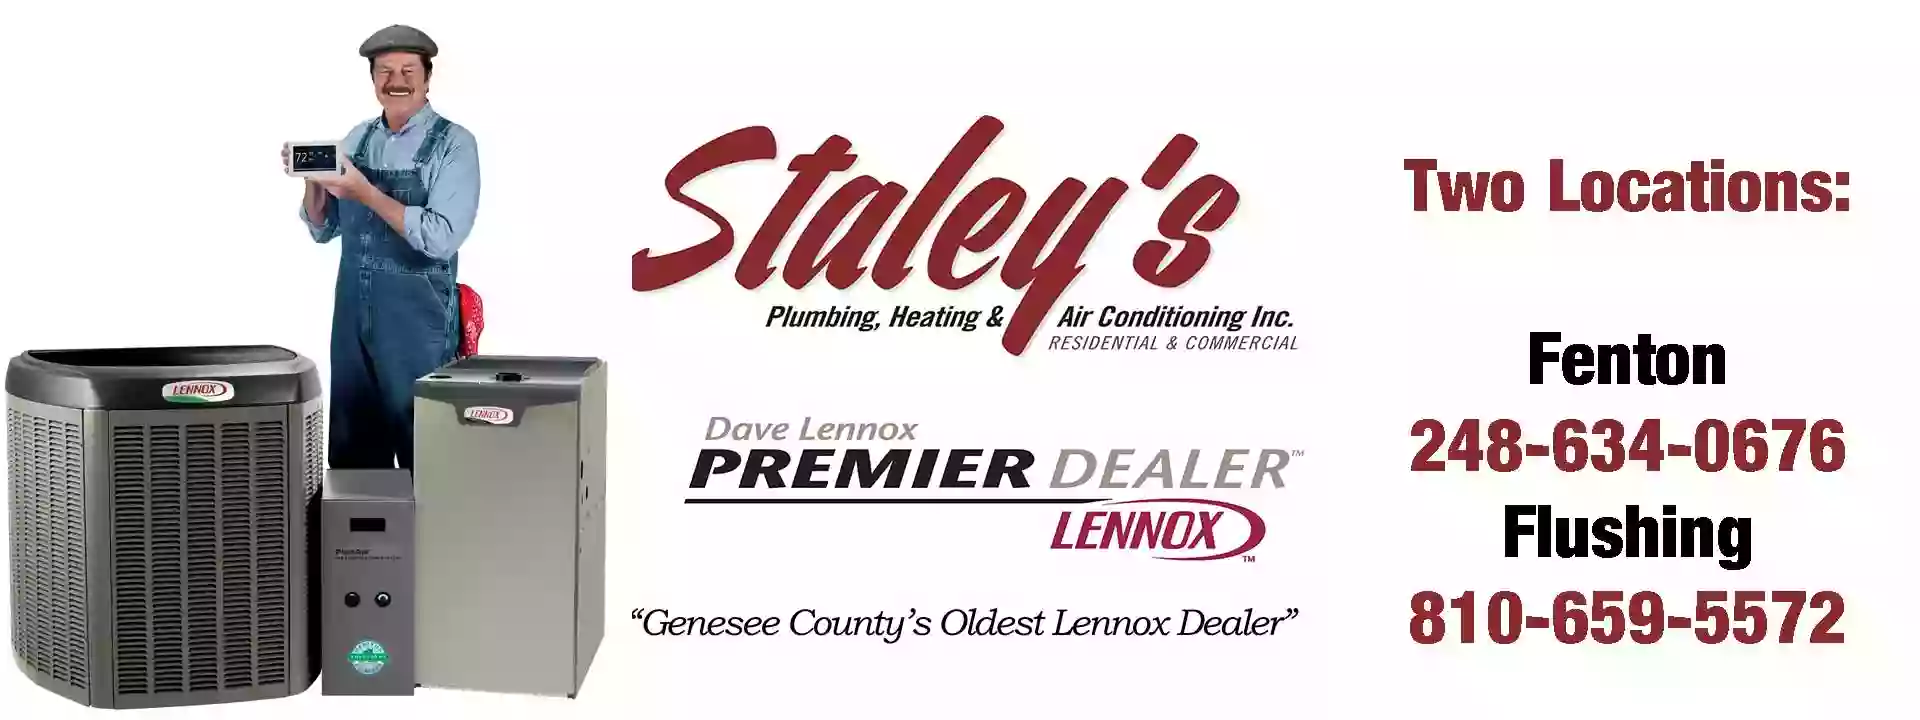 Staley's Plumbing Heating and Air Conditioning